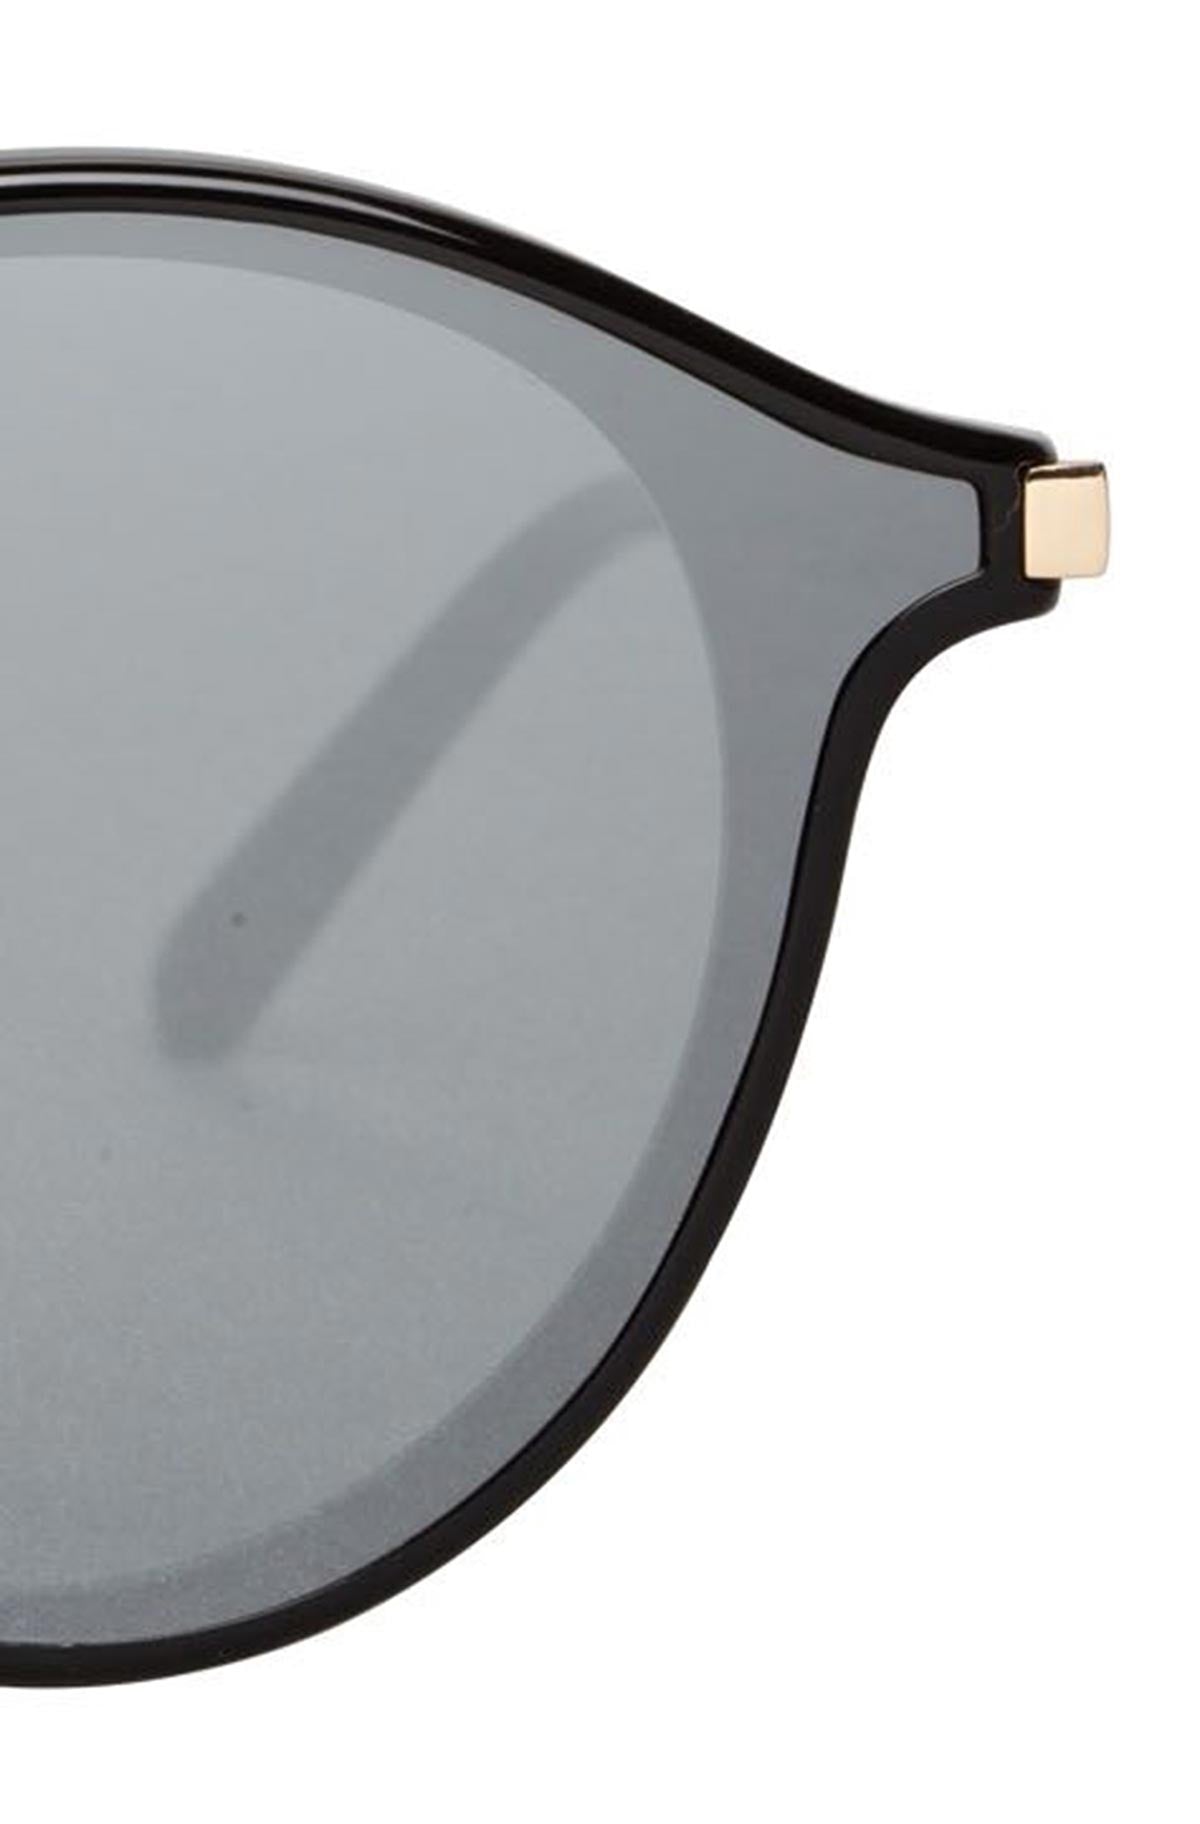 A pair of black SUMMIT sunglasses by Bonnie Clyde with gold frames.-1255412367441